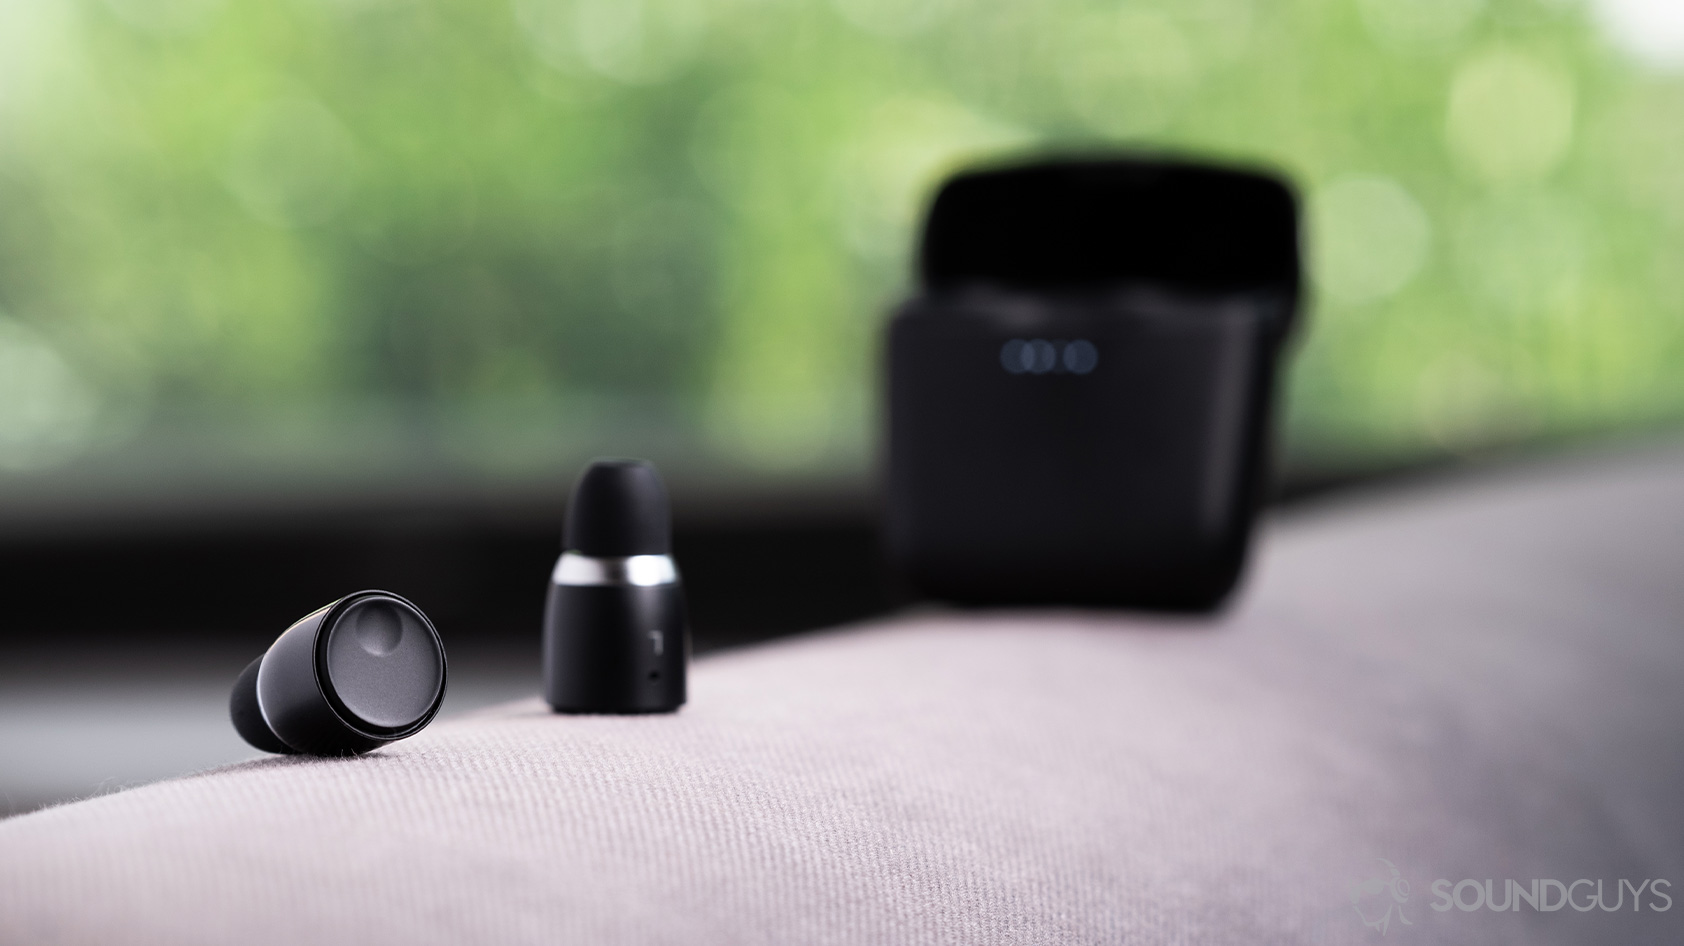 An image of the Cambridge Audio Melomania 1 true wireless earbuds outside of the case and in focus. The charging case is out of focus and open in the background. Both objects are on a cloth surface.